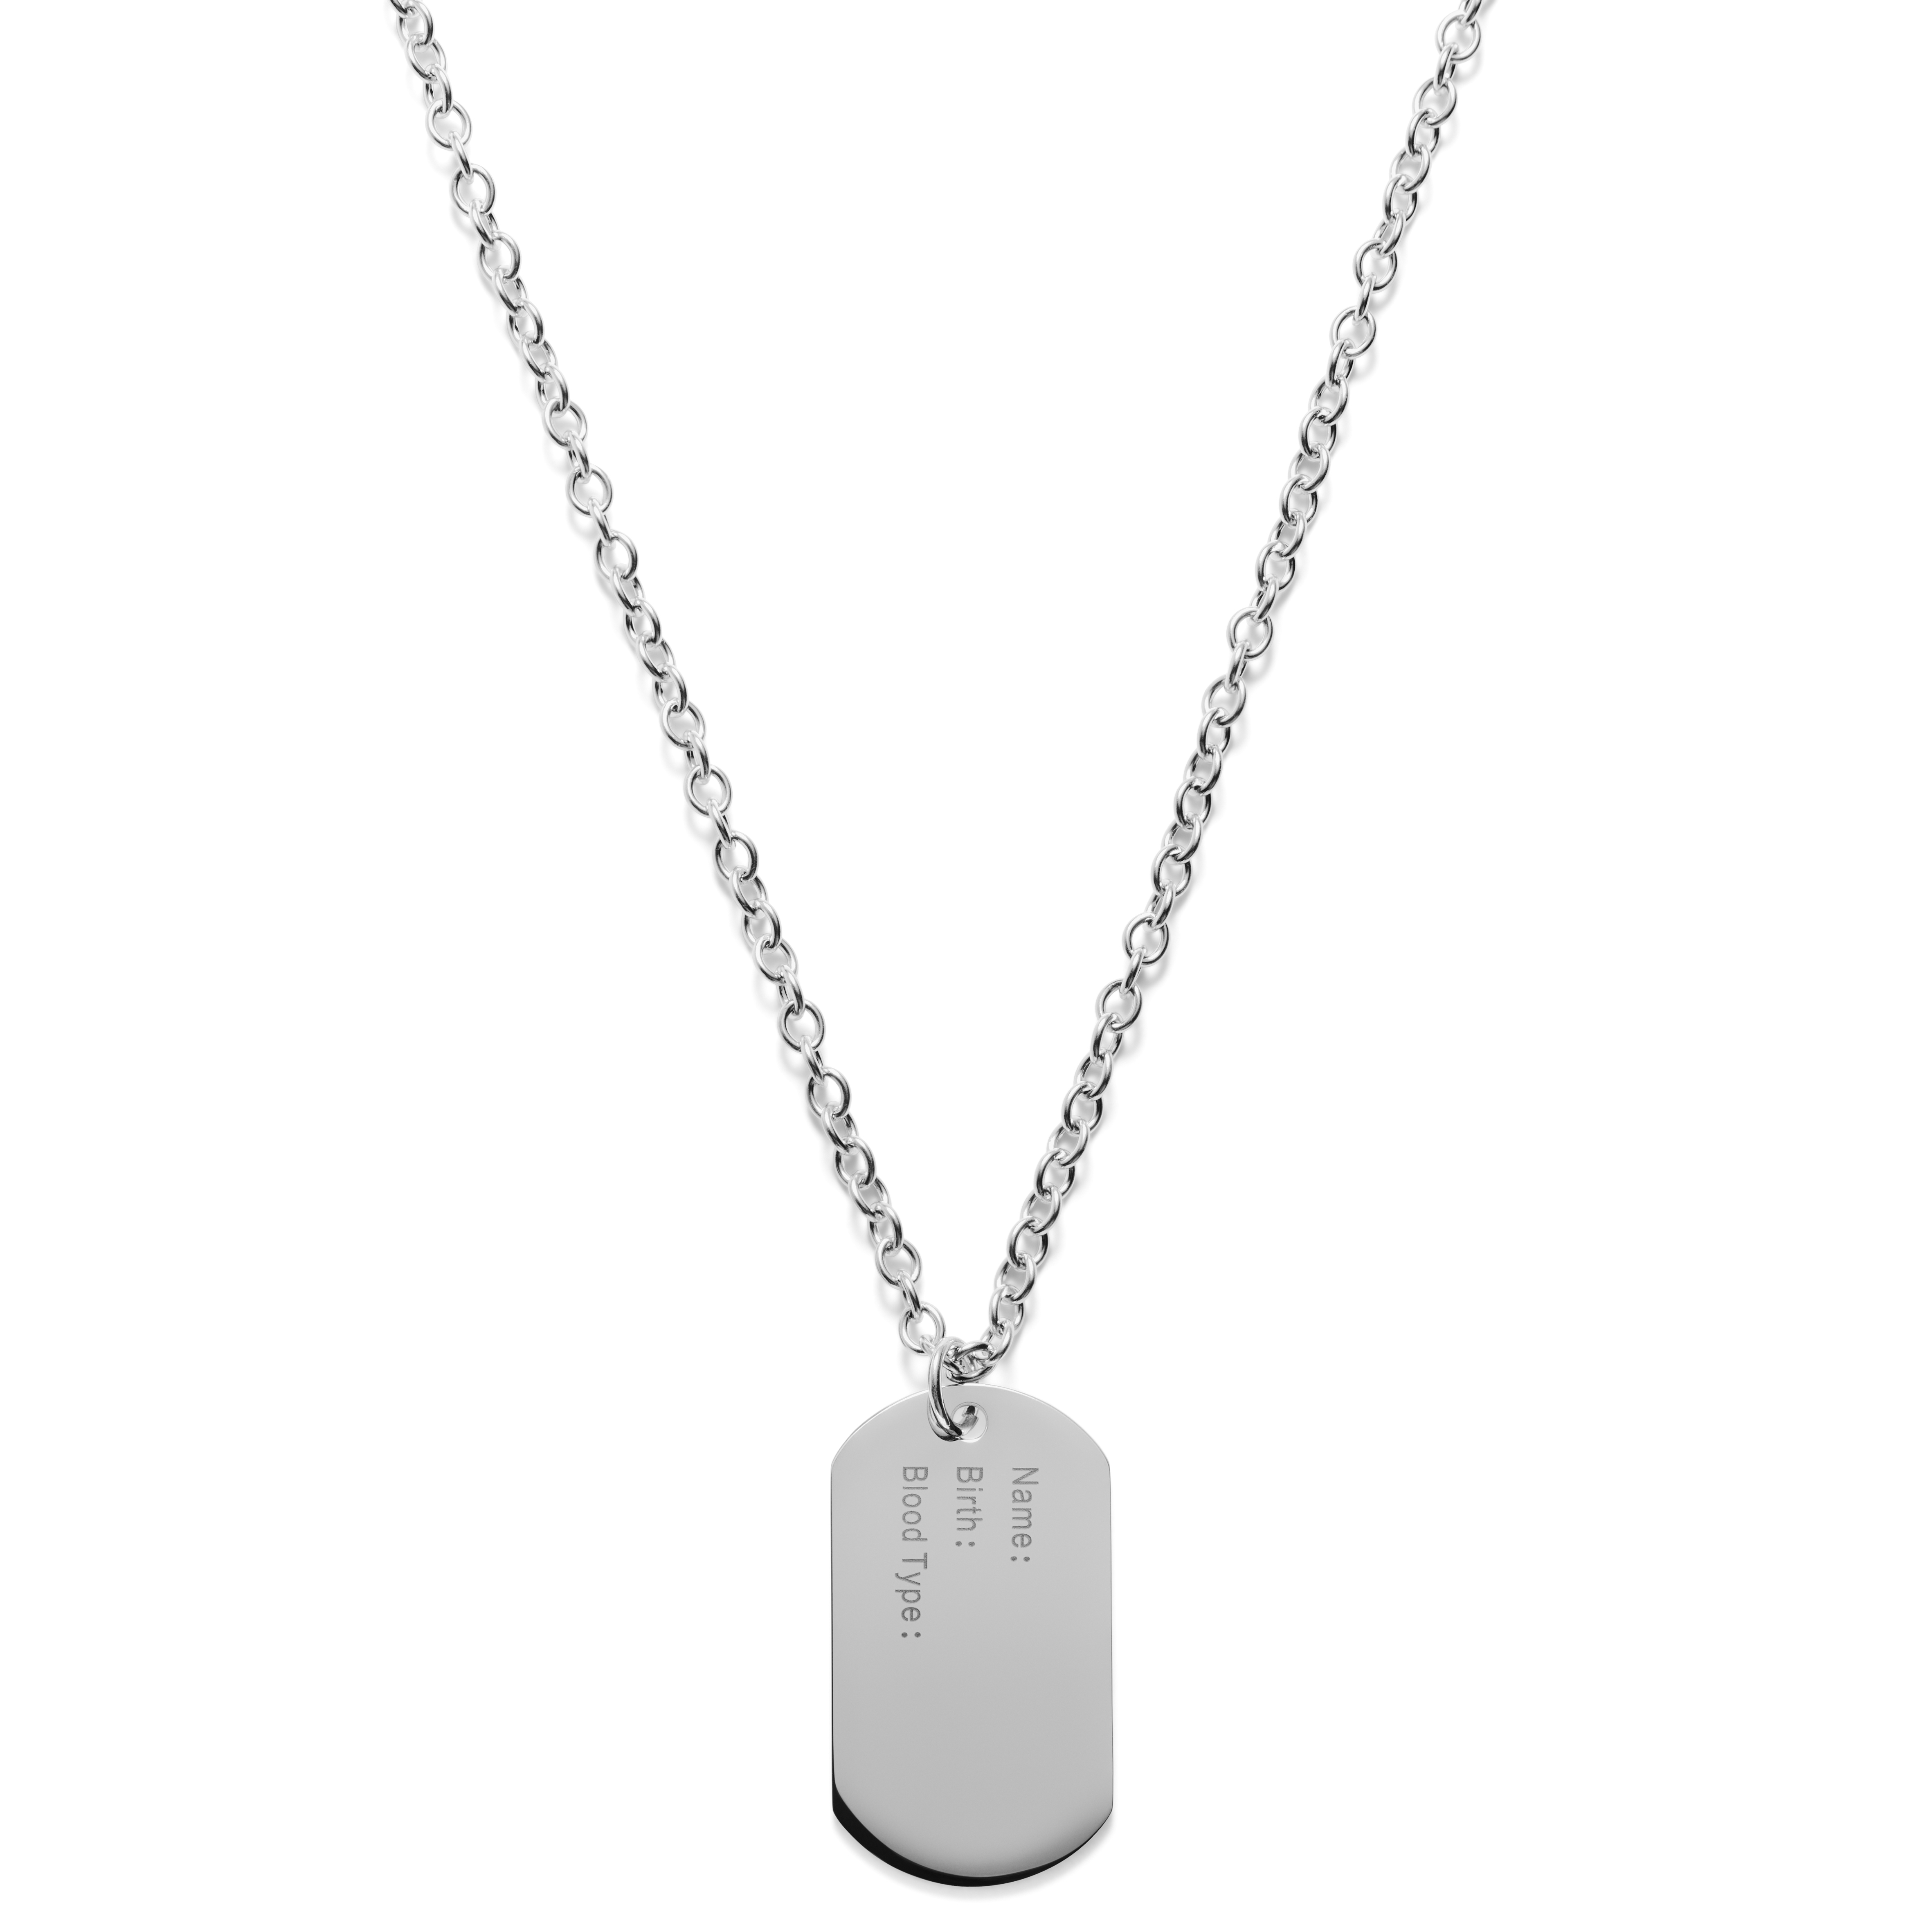 Silver Dog Tag Pendant Chain Necklace | Claire's US